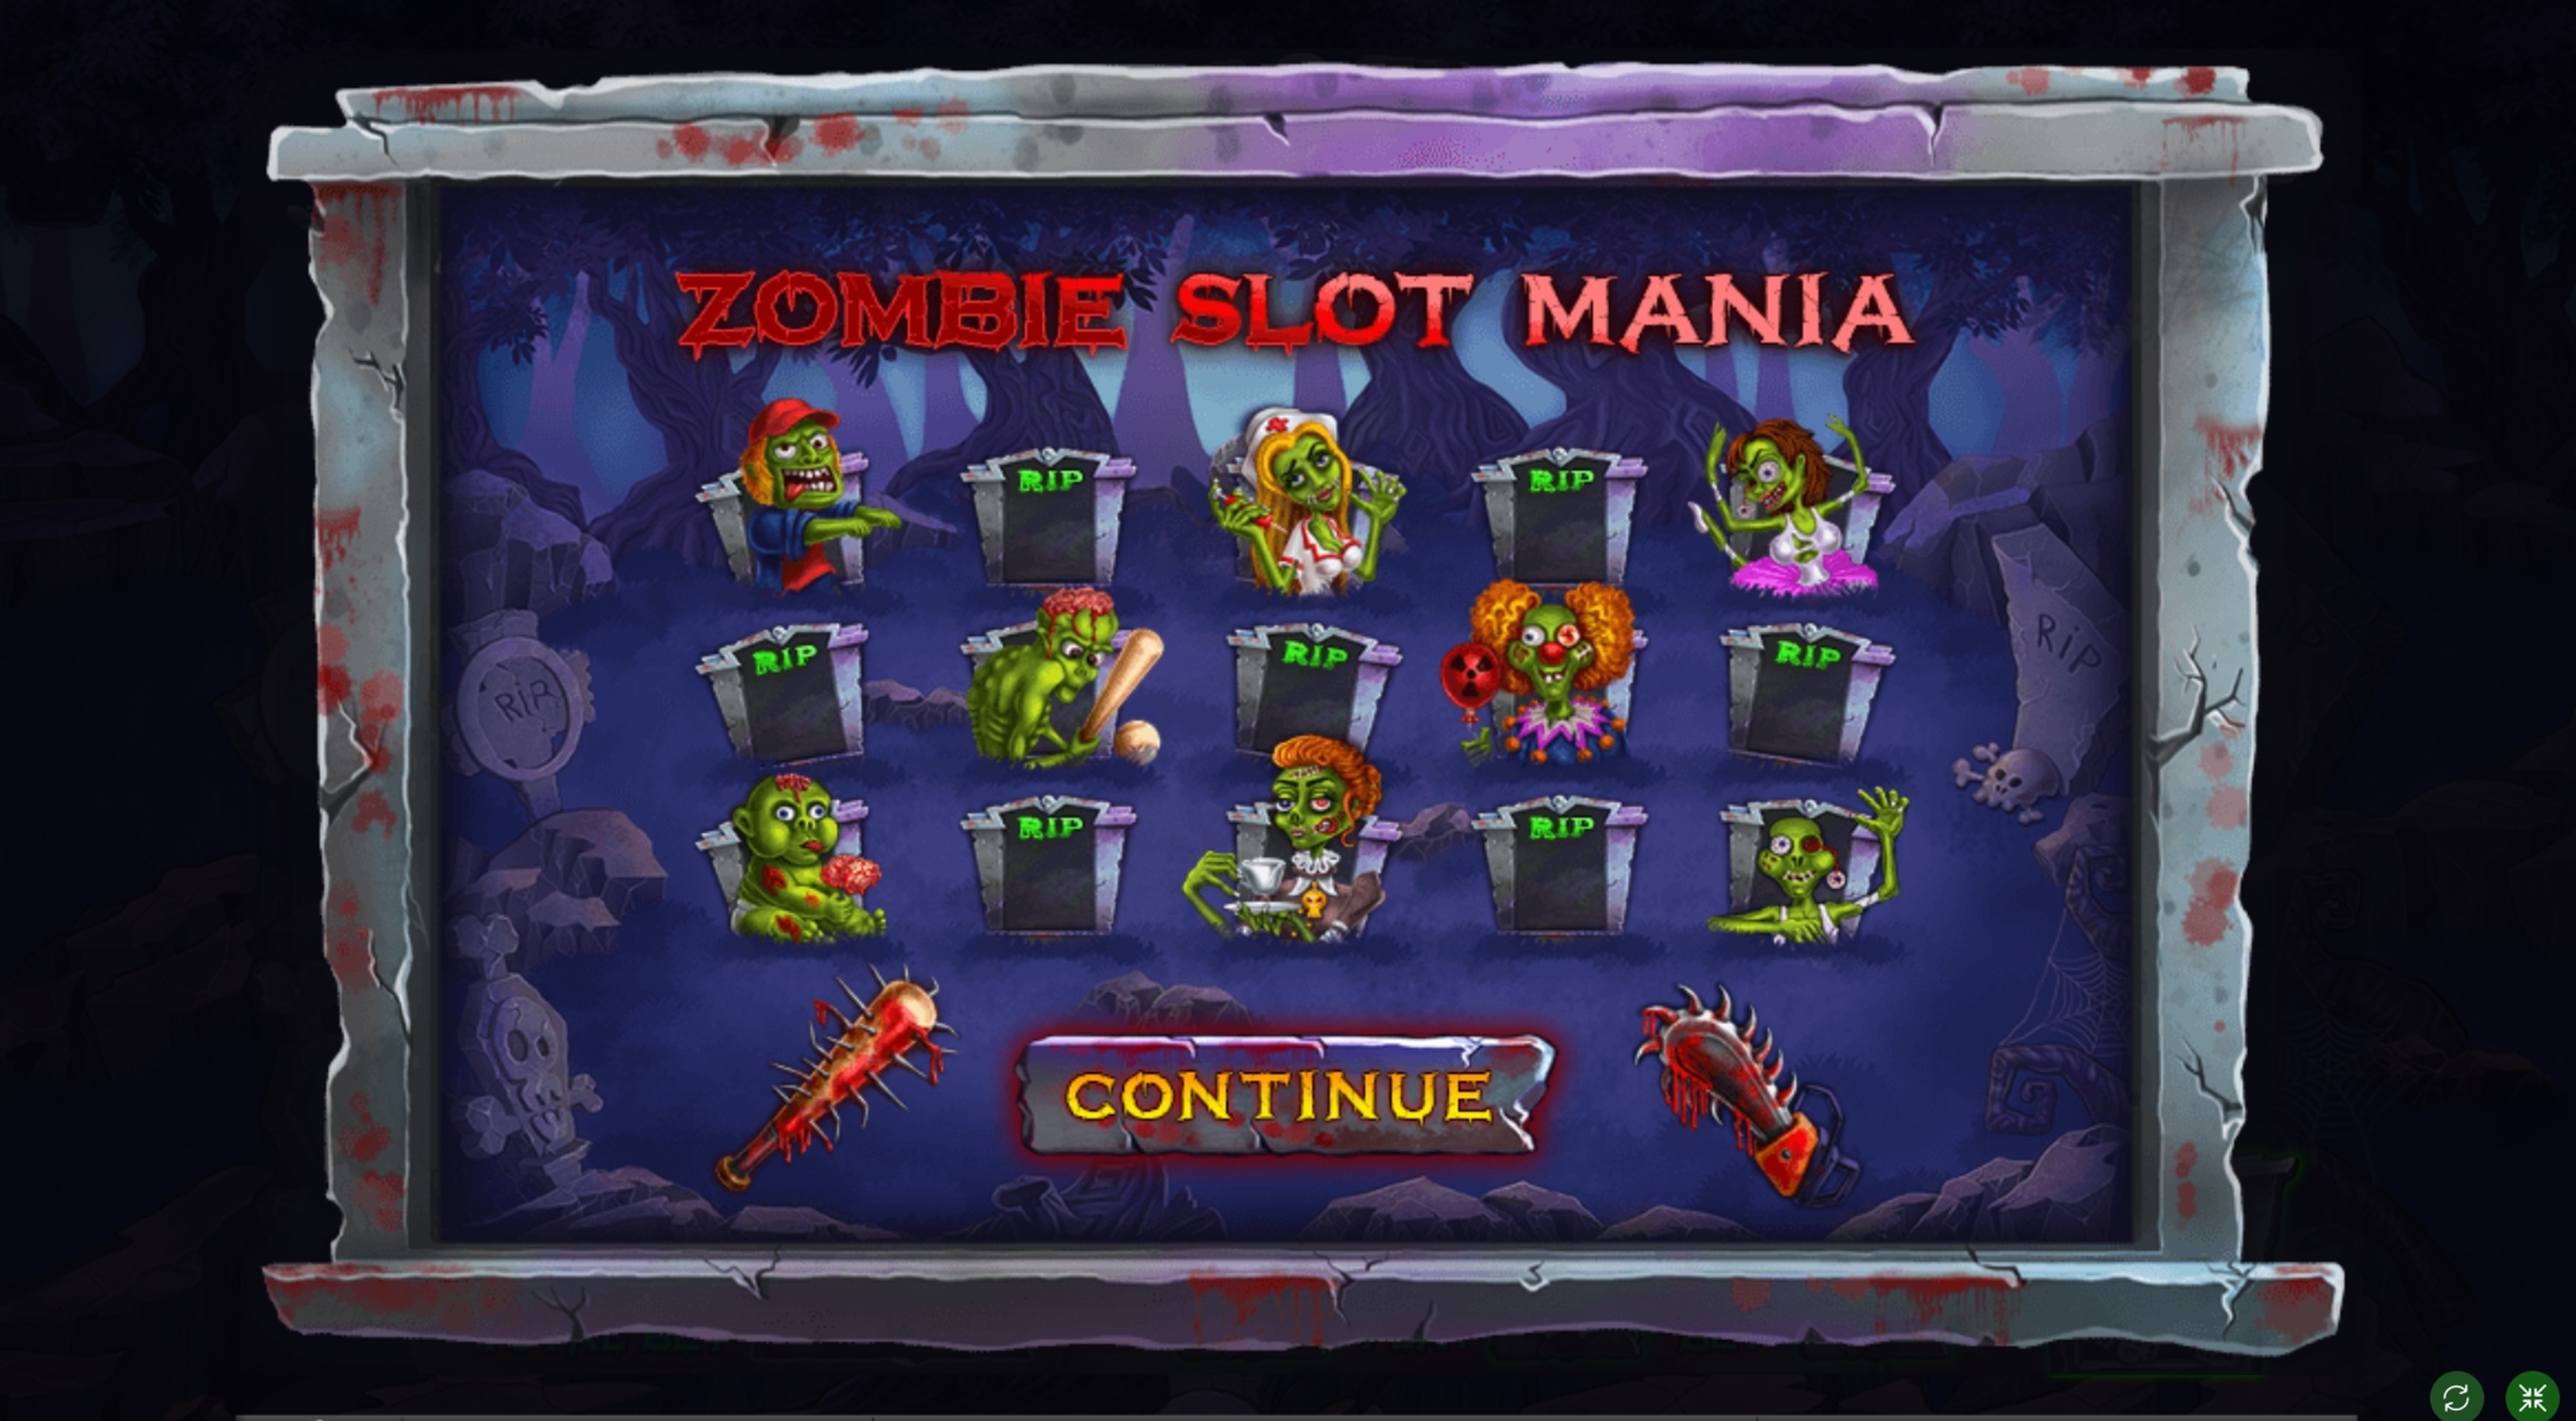 Play Zombie slot mania Free Casino Slot Game by Spinomenal